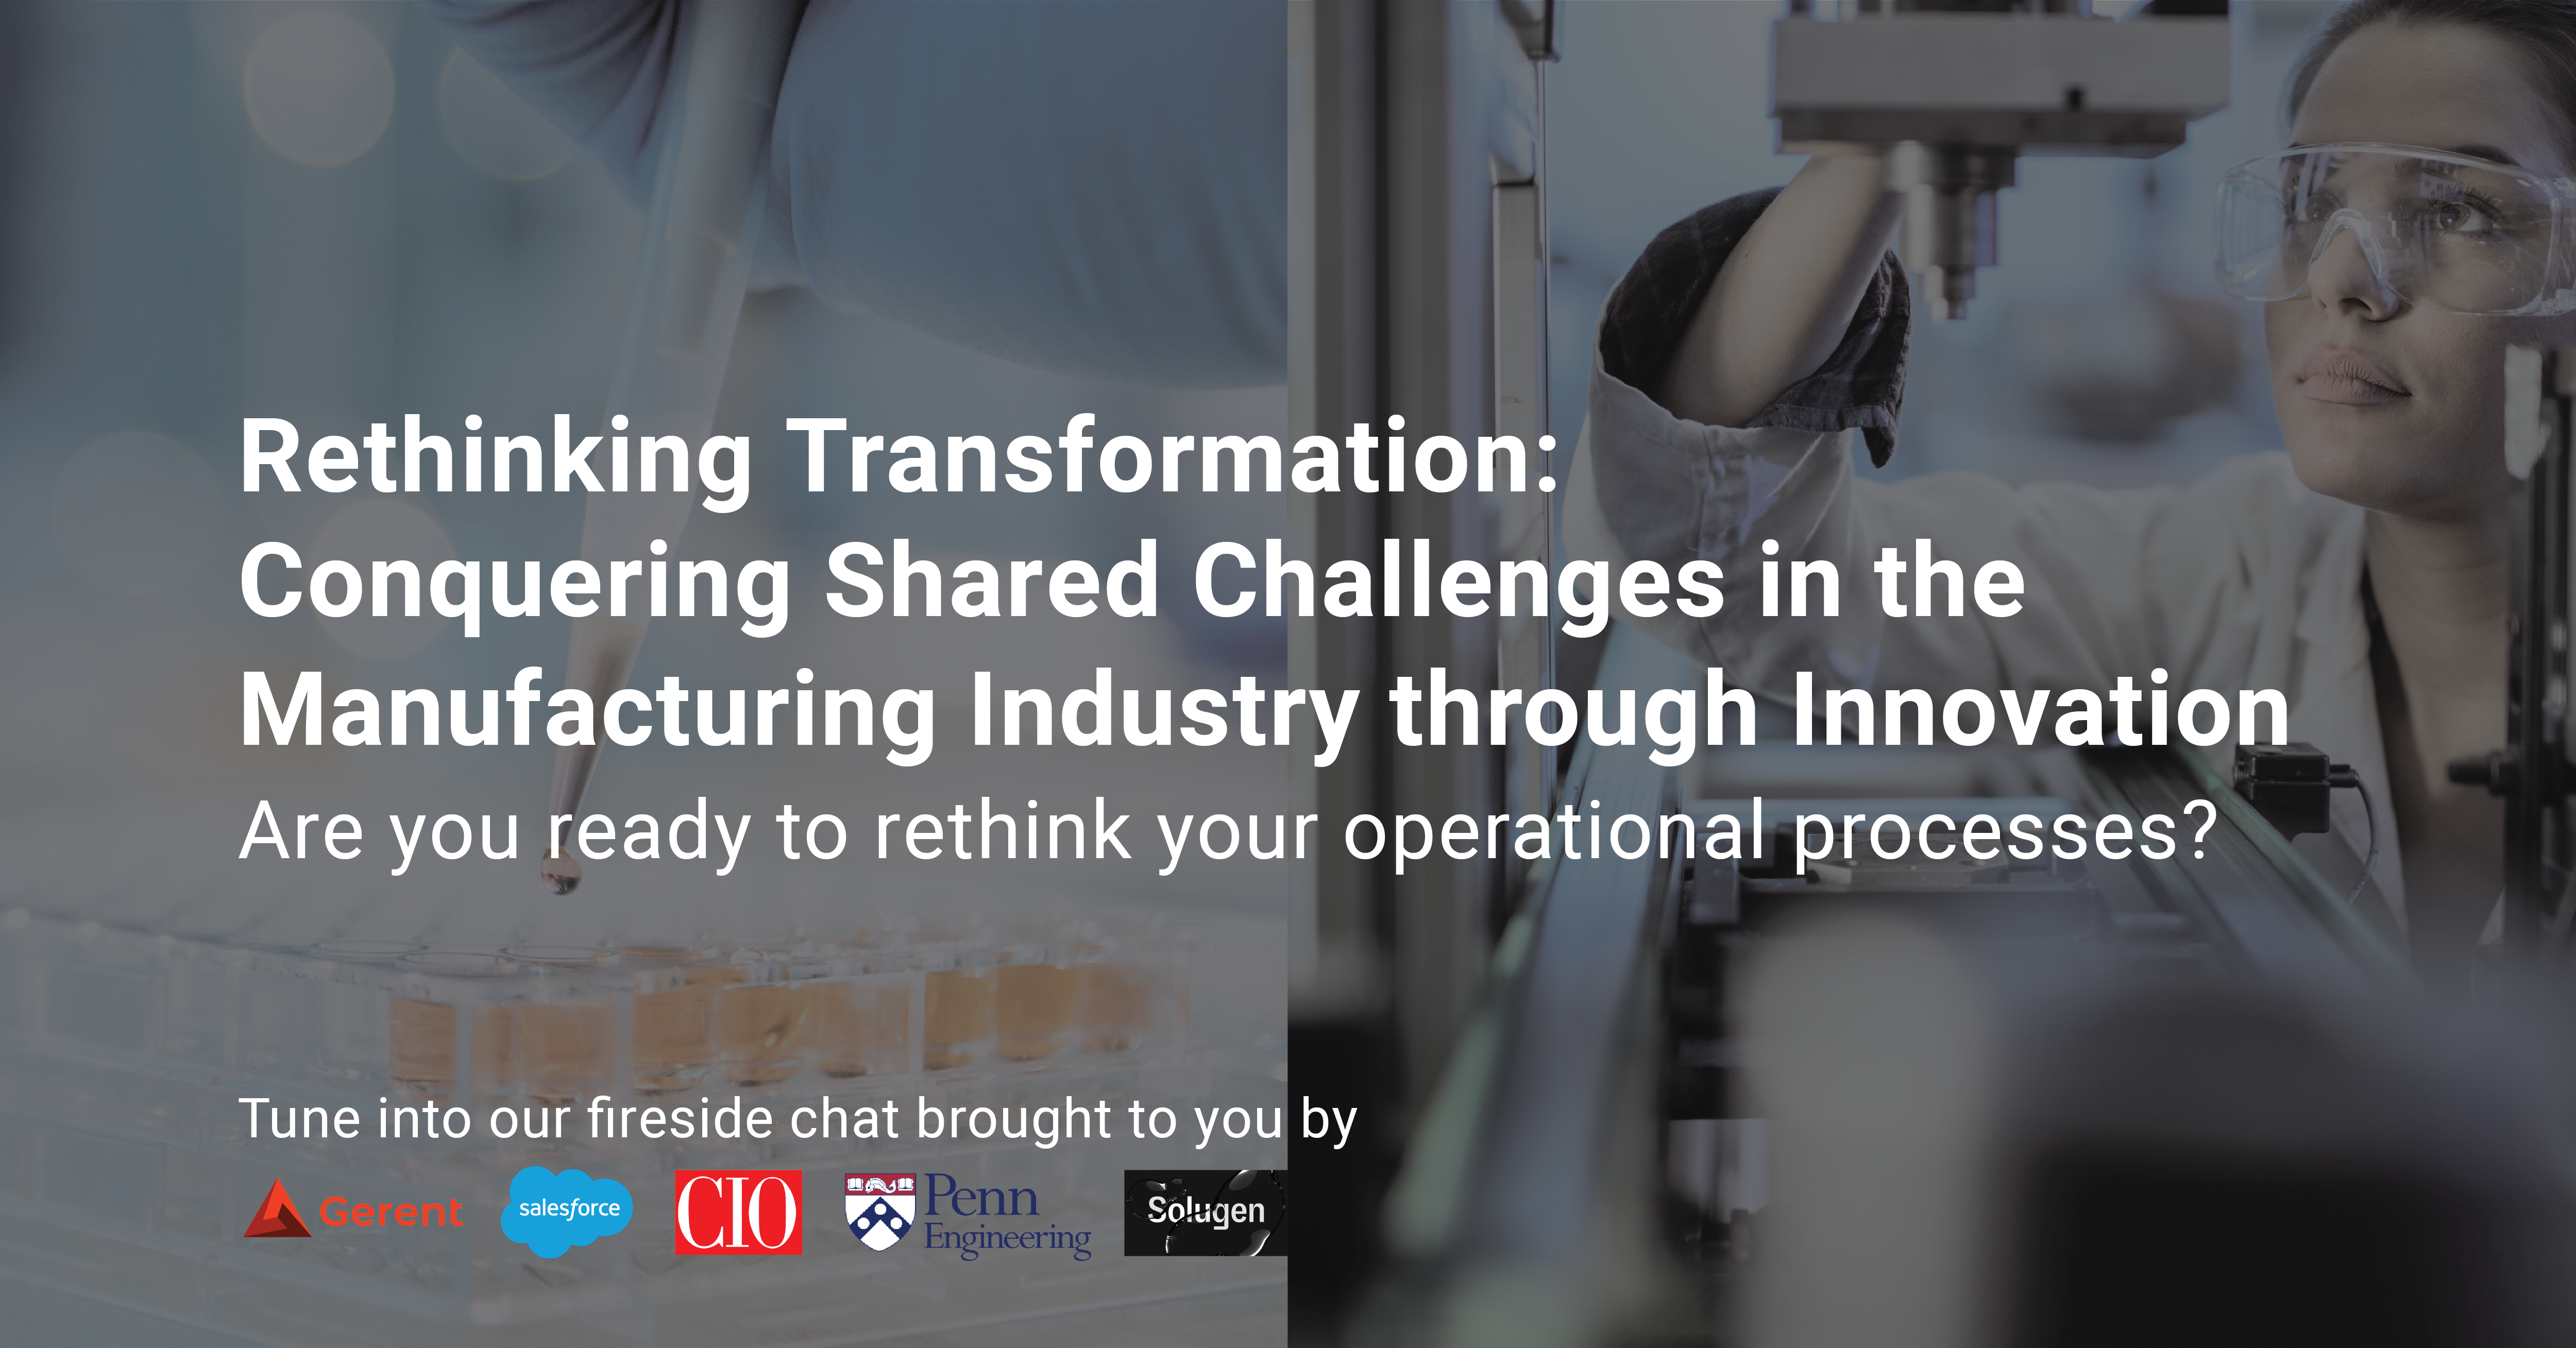 Rethinking Transformation: Conquering Shared Challenges in the Manufacturing Industry through Innovation